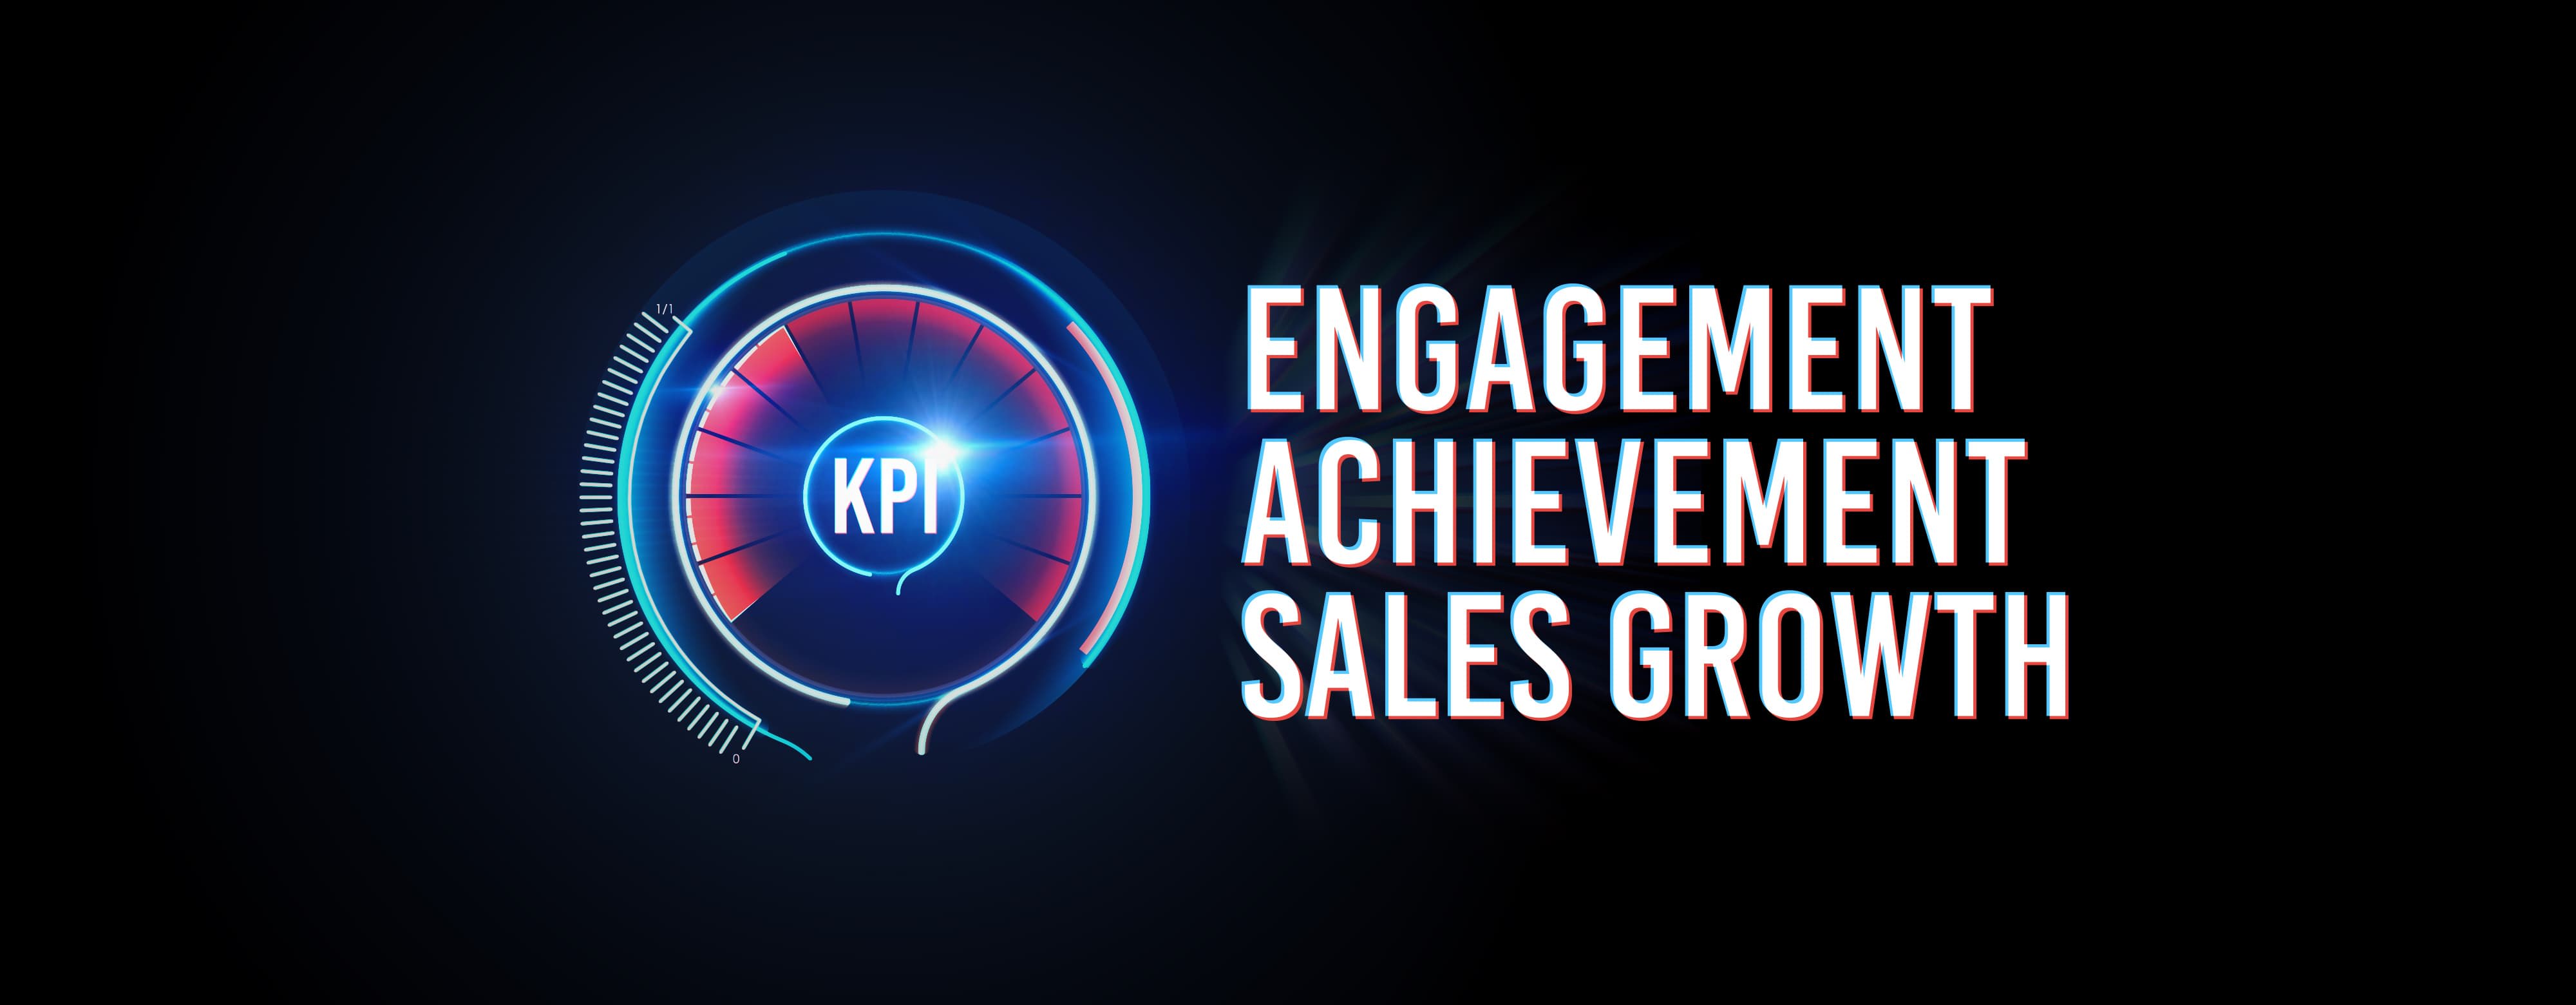 Image reads engagement, achievement and sales growth